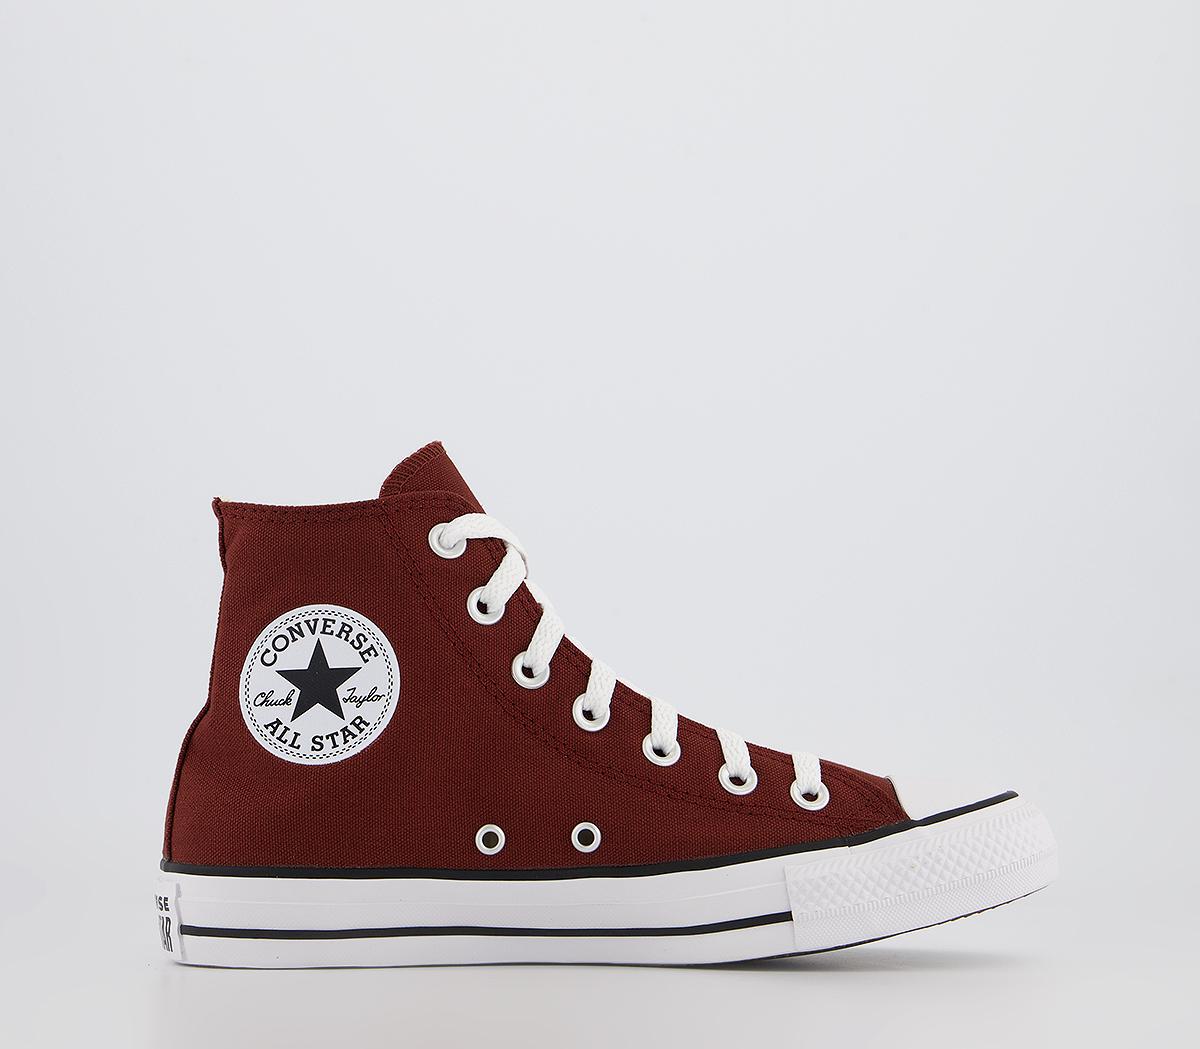 Converse Converse All Star Hi Trainers Rosewood White Black - Women's  Trainers